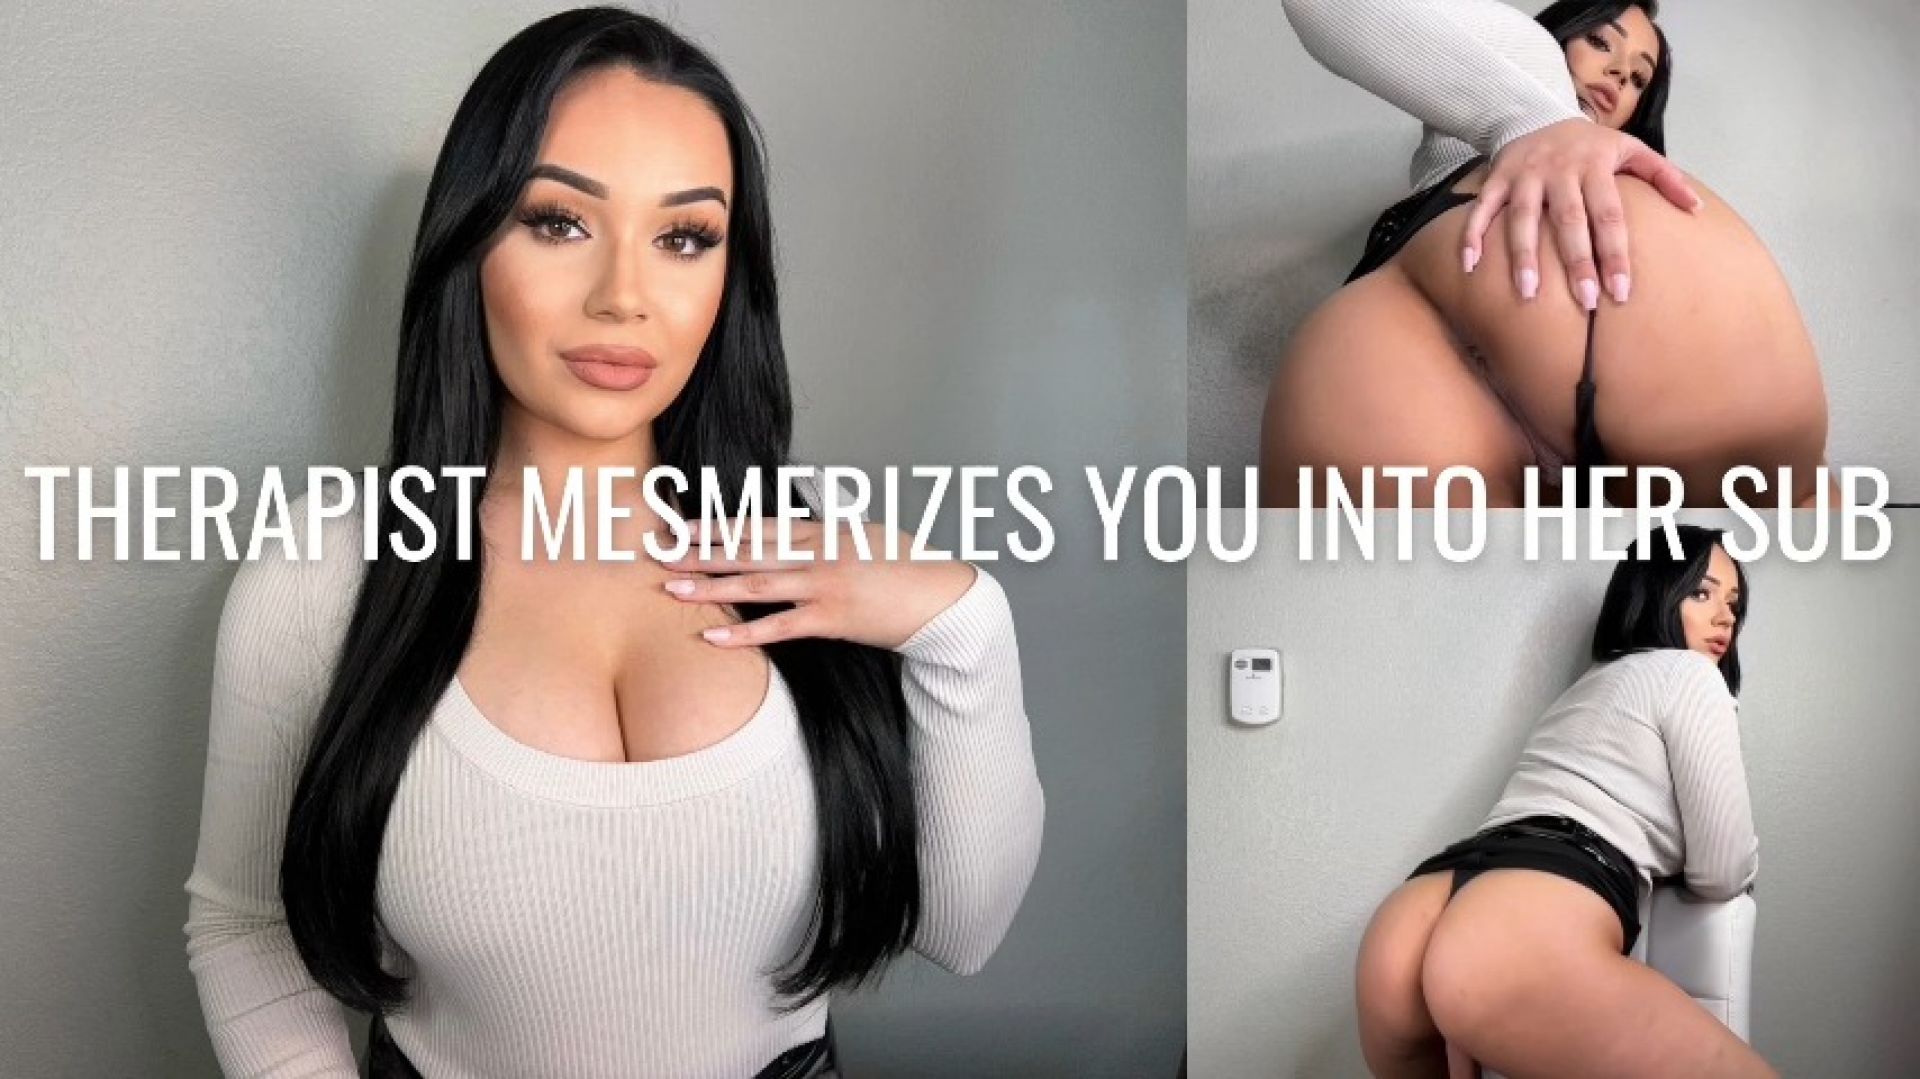 leaked THERAPIST MESMERIZES YOU INTO HER SUB video thumbnail